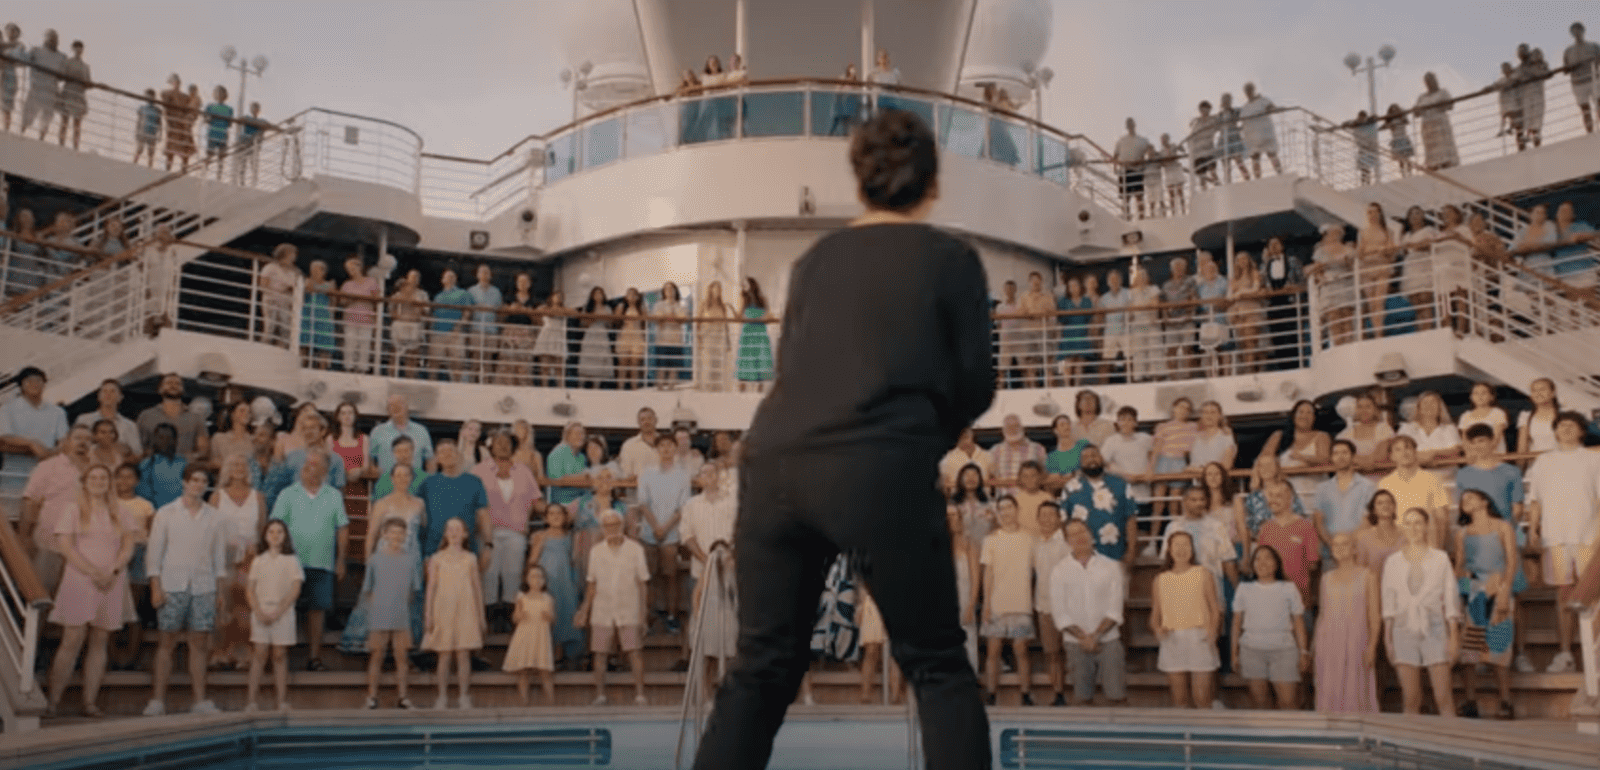 P&O imagery from campaign choir singing on board a cruise ship